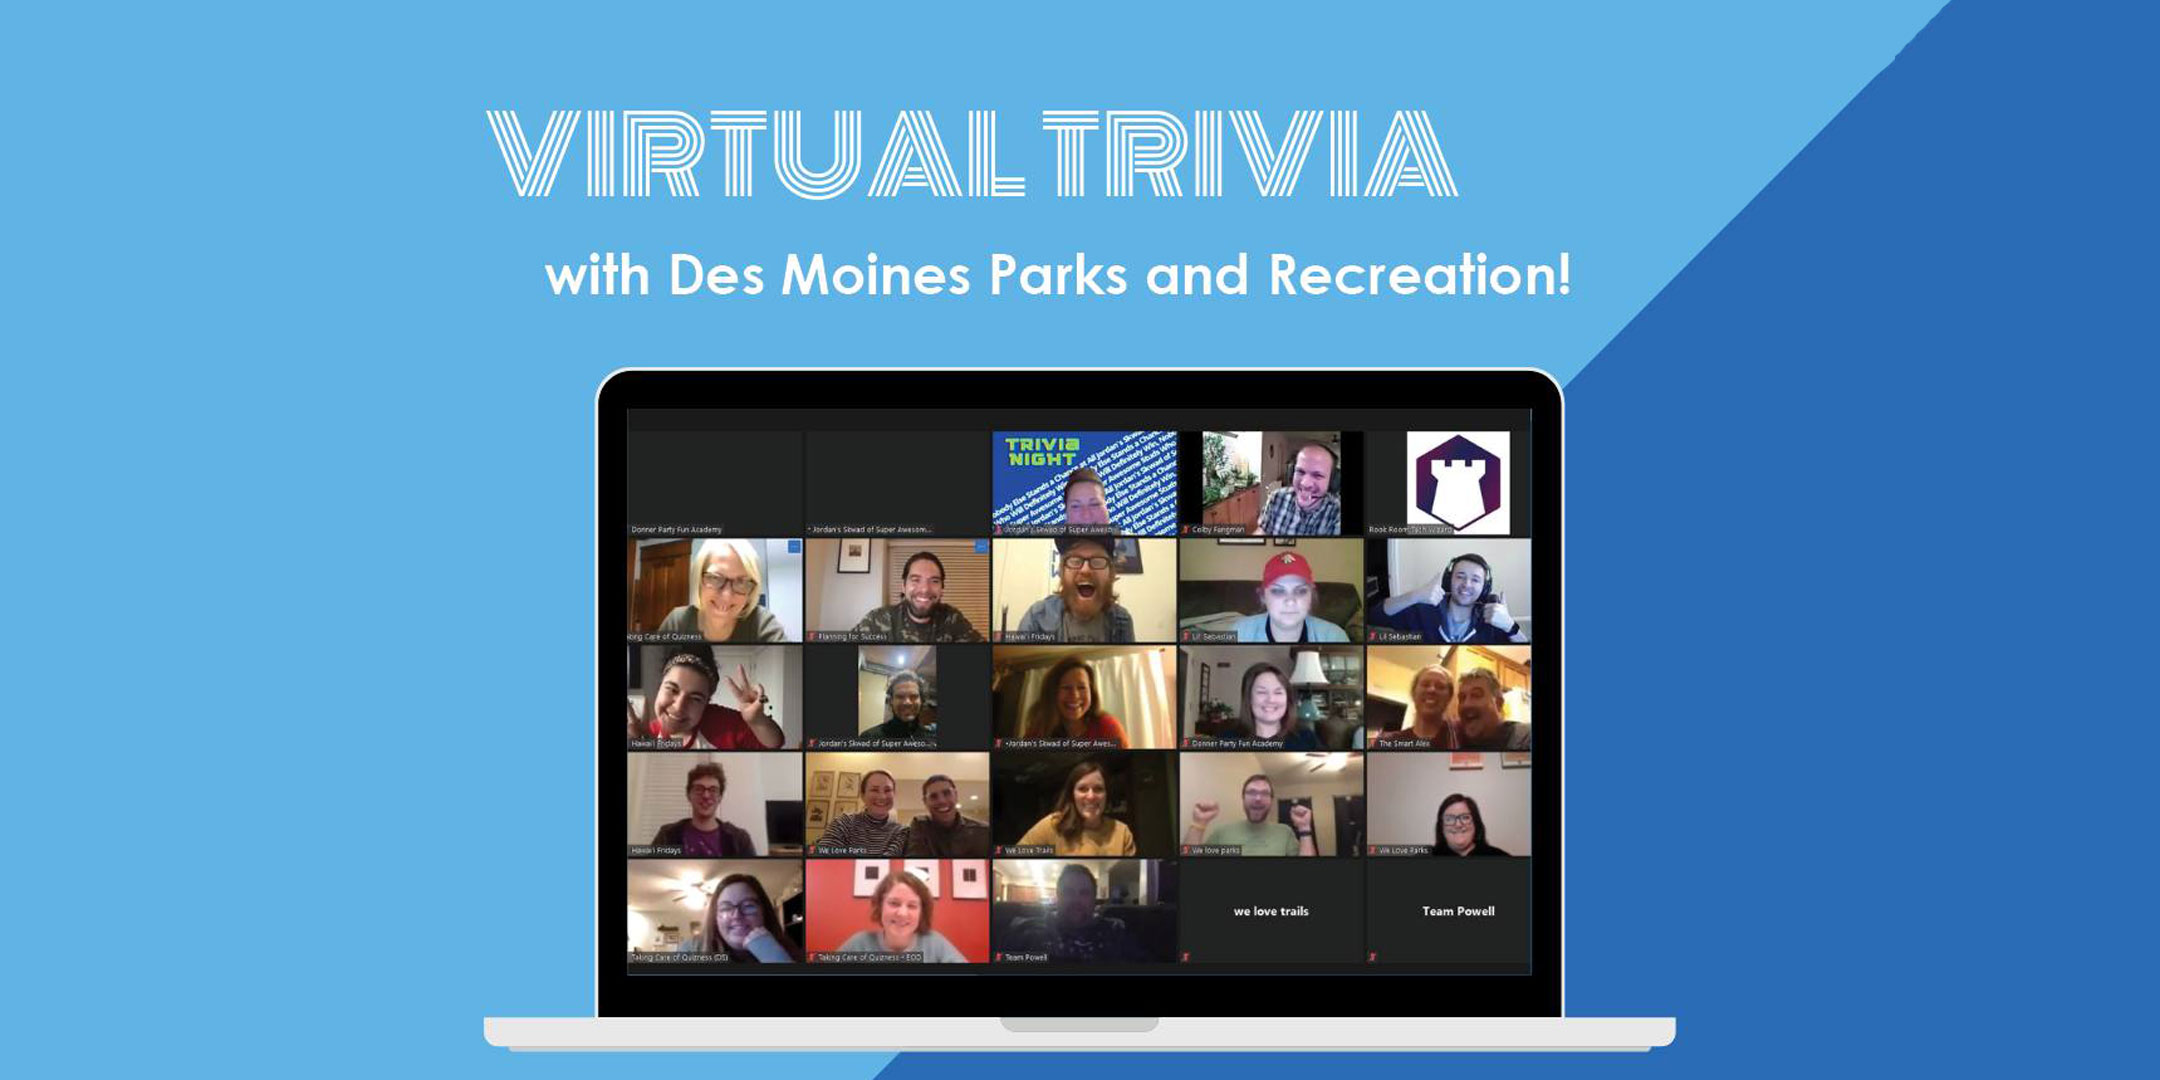 Des Moines Parks and Rec Virtual Trivia Night